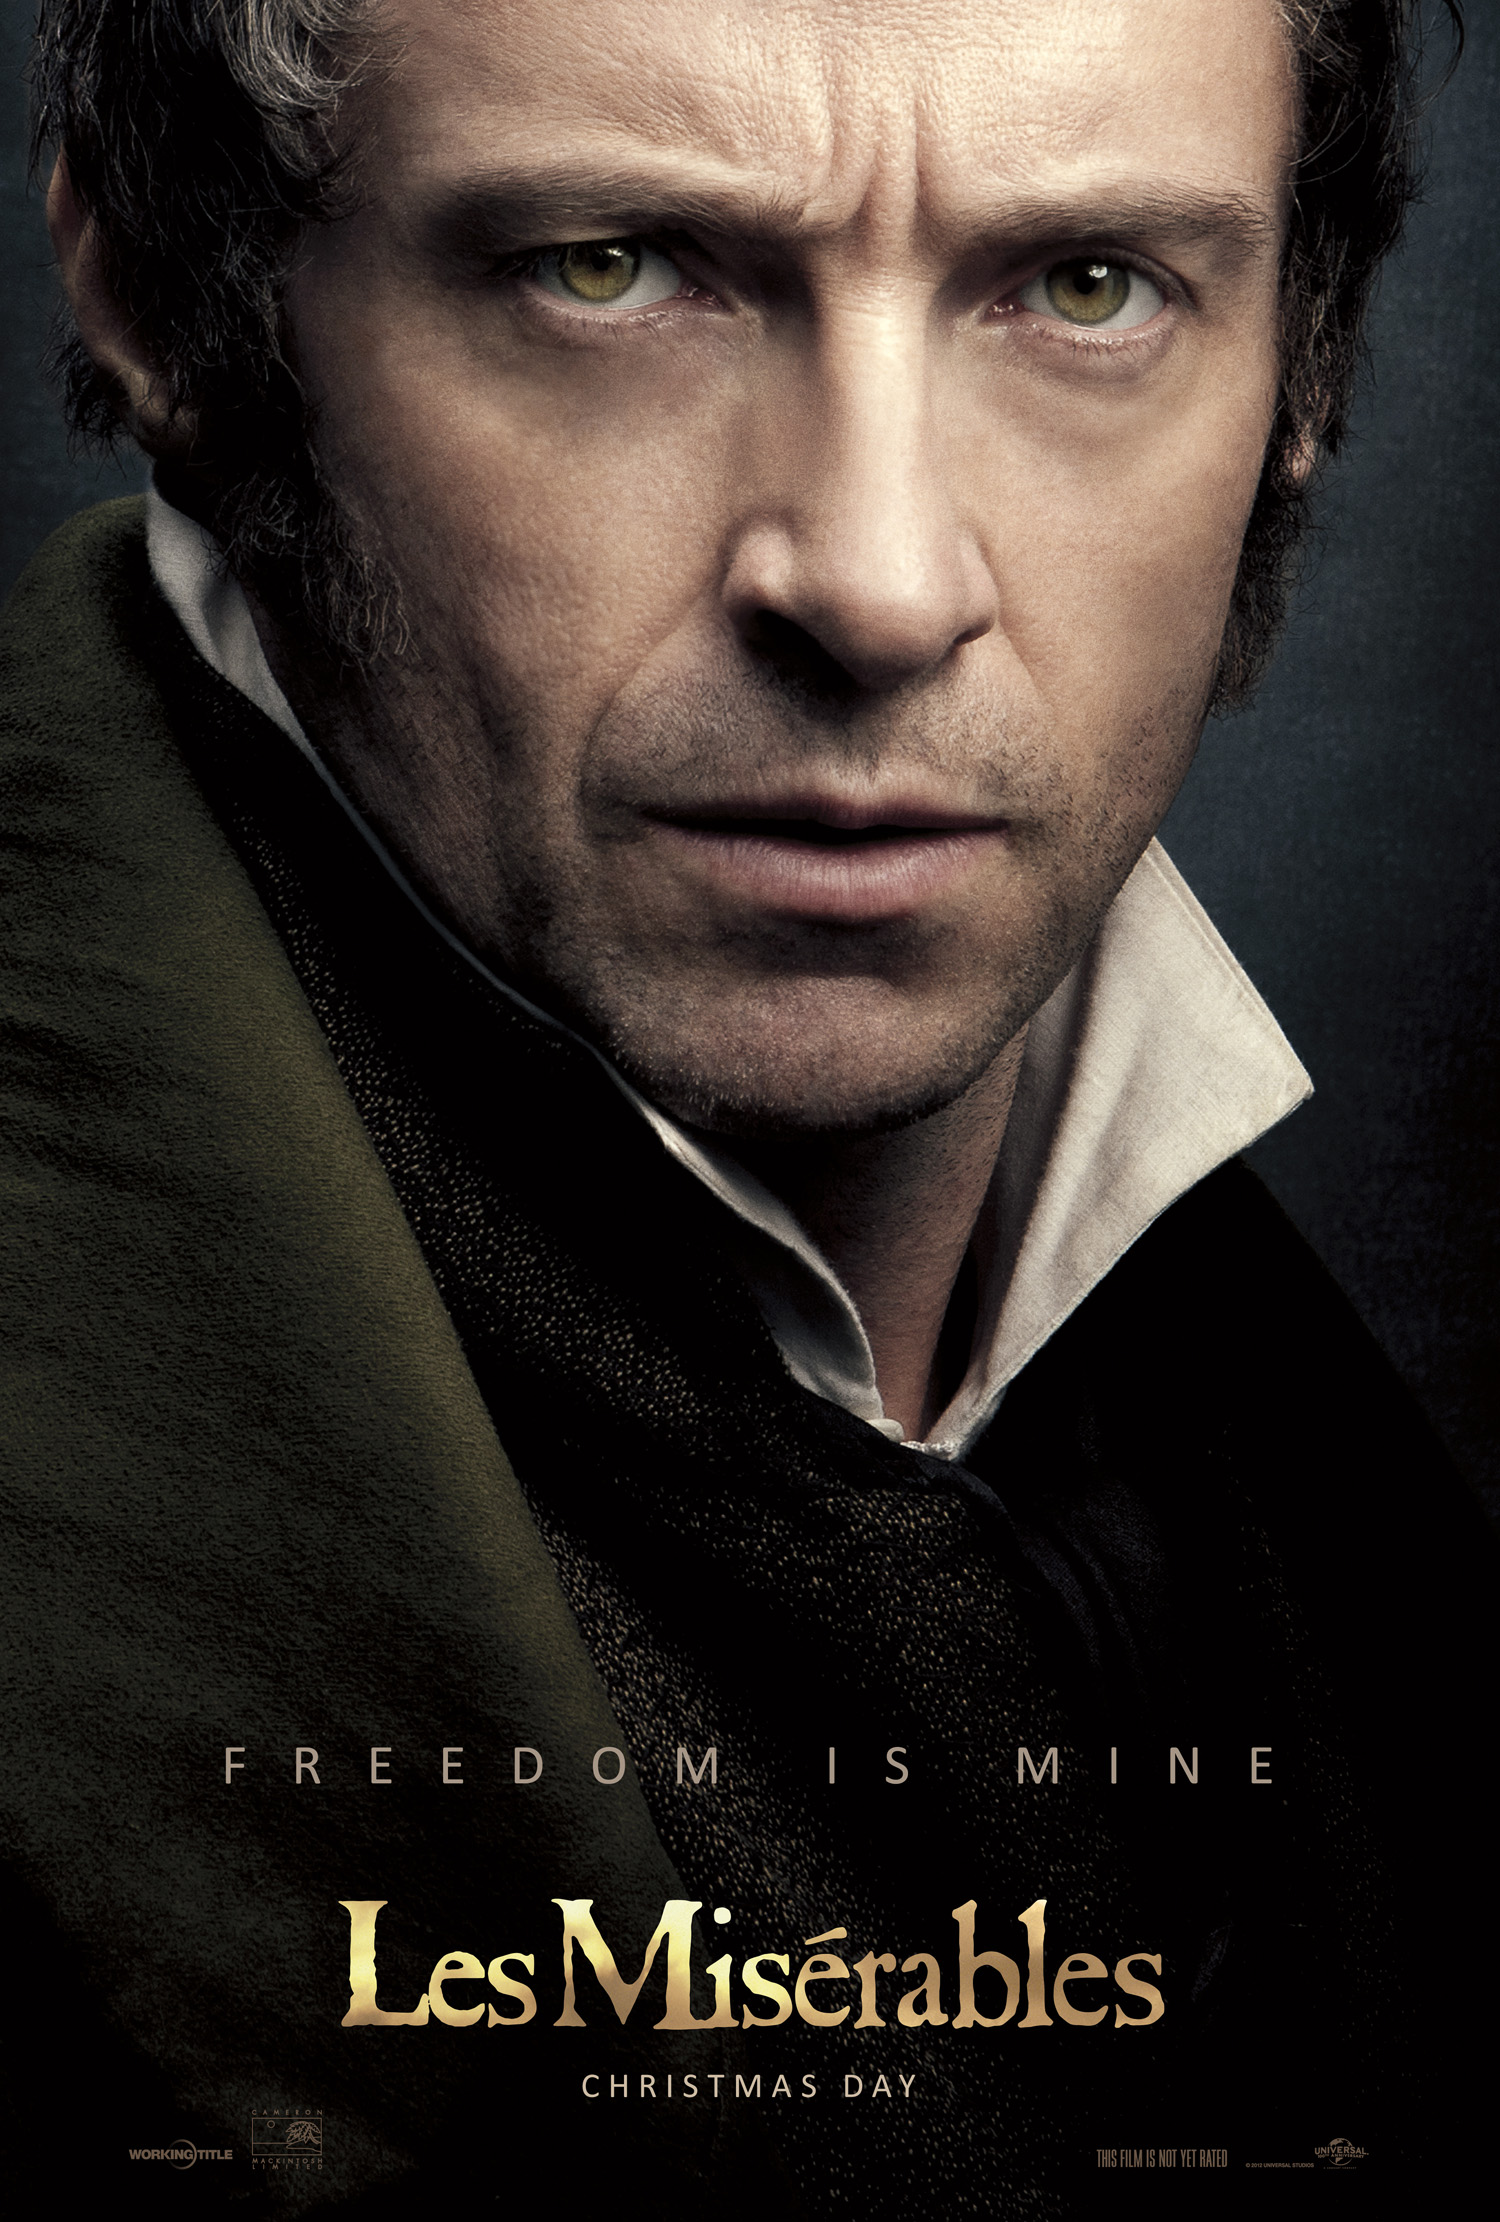 Are You Excited About Les Misérables Coming to the Theaters? Check Out this Extended First Look!